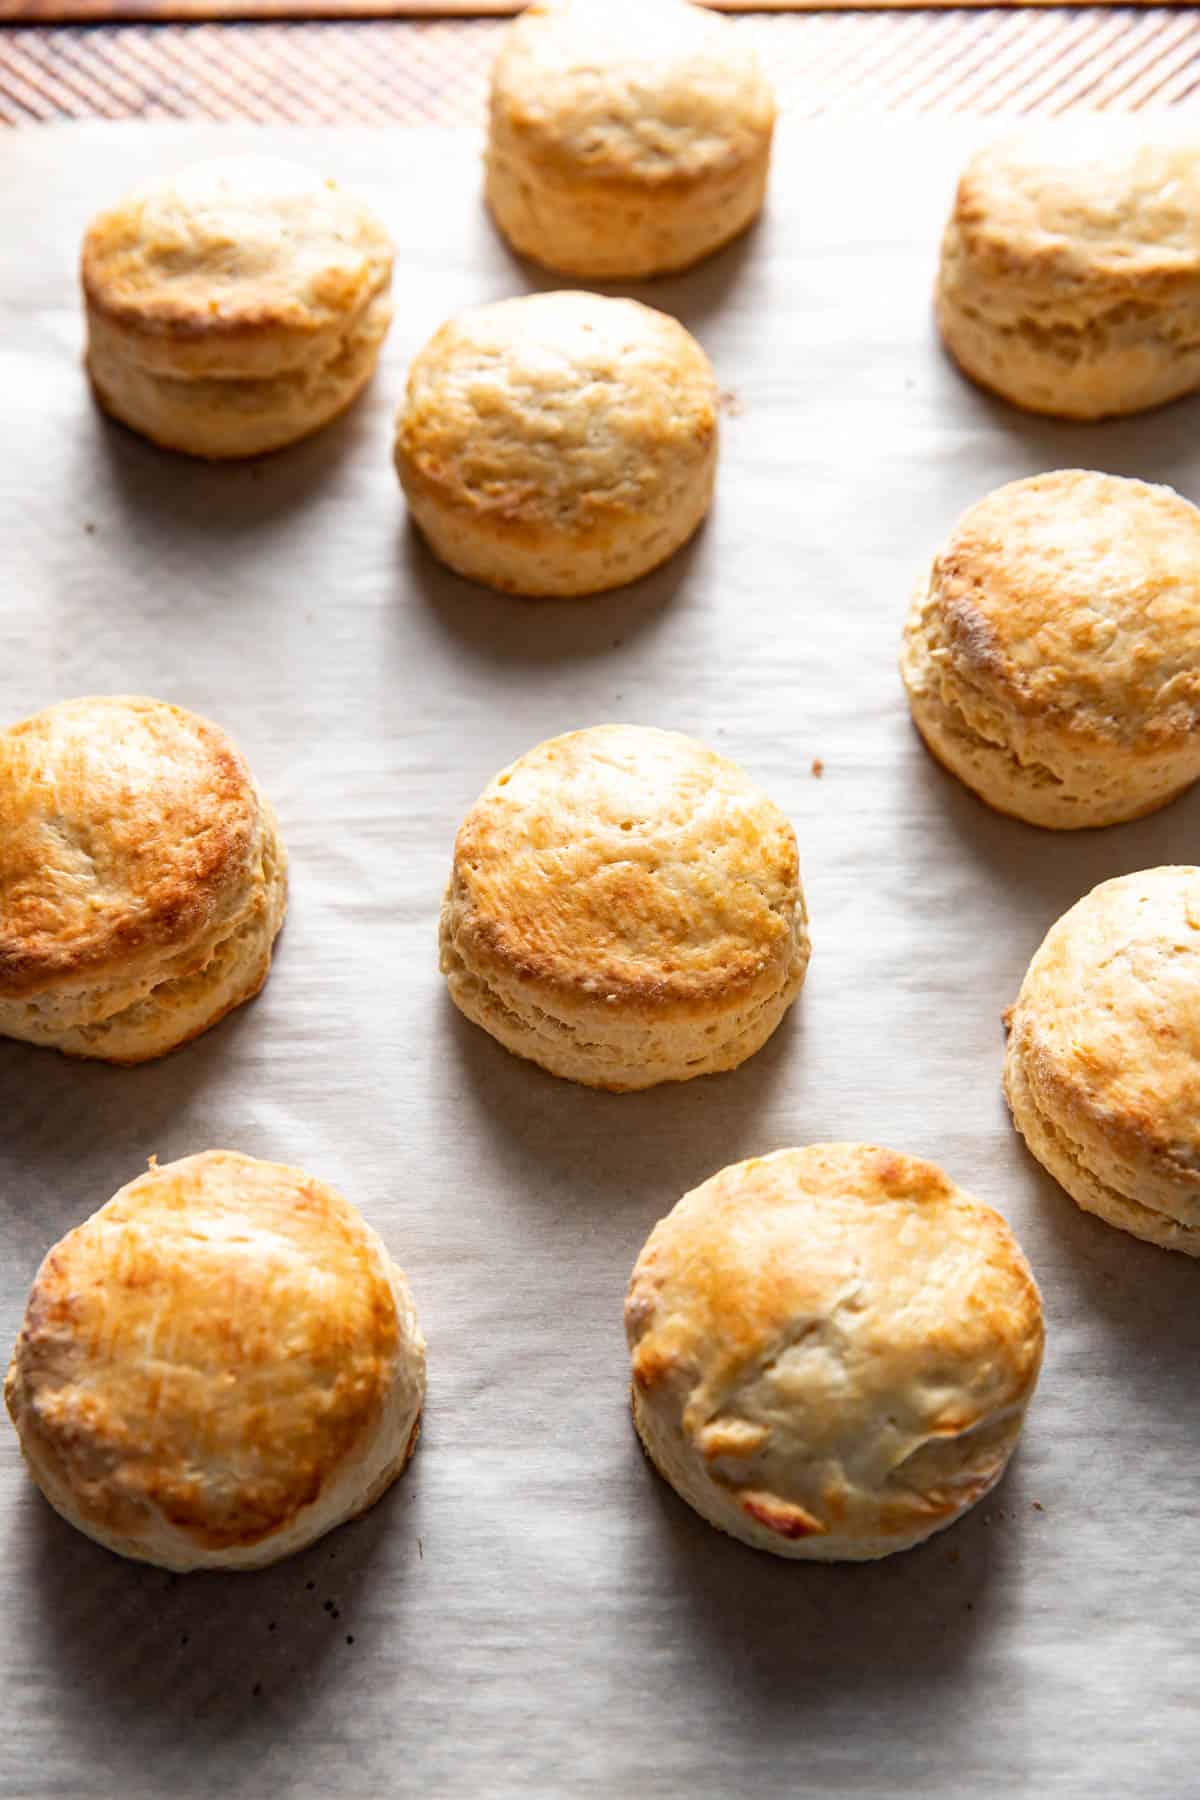 biscuits on a baking tray.